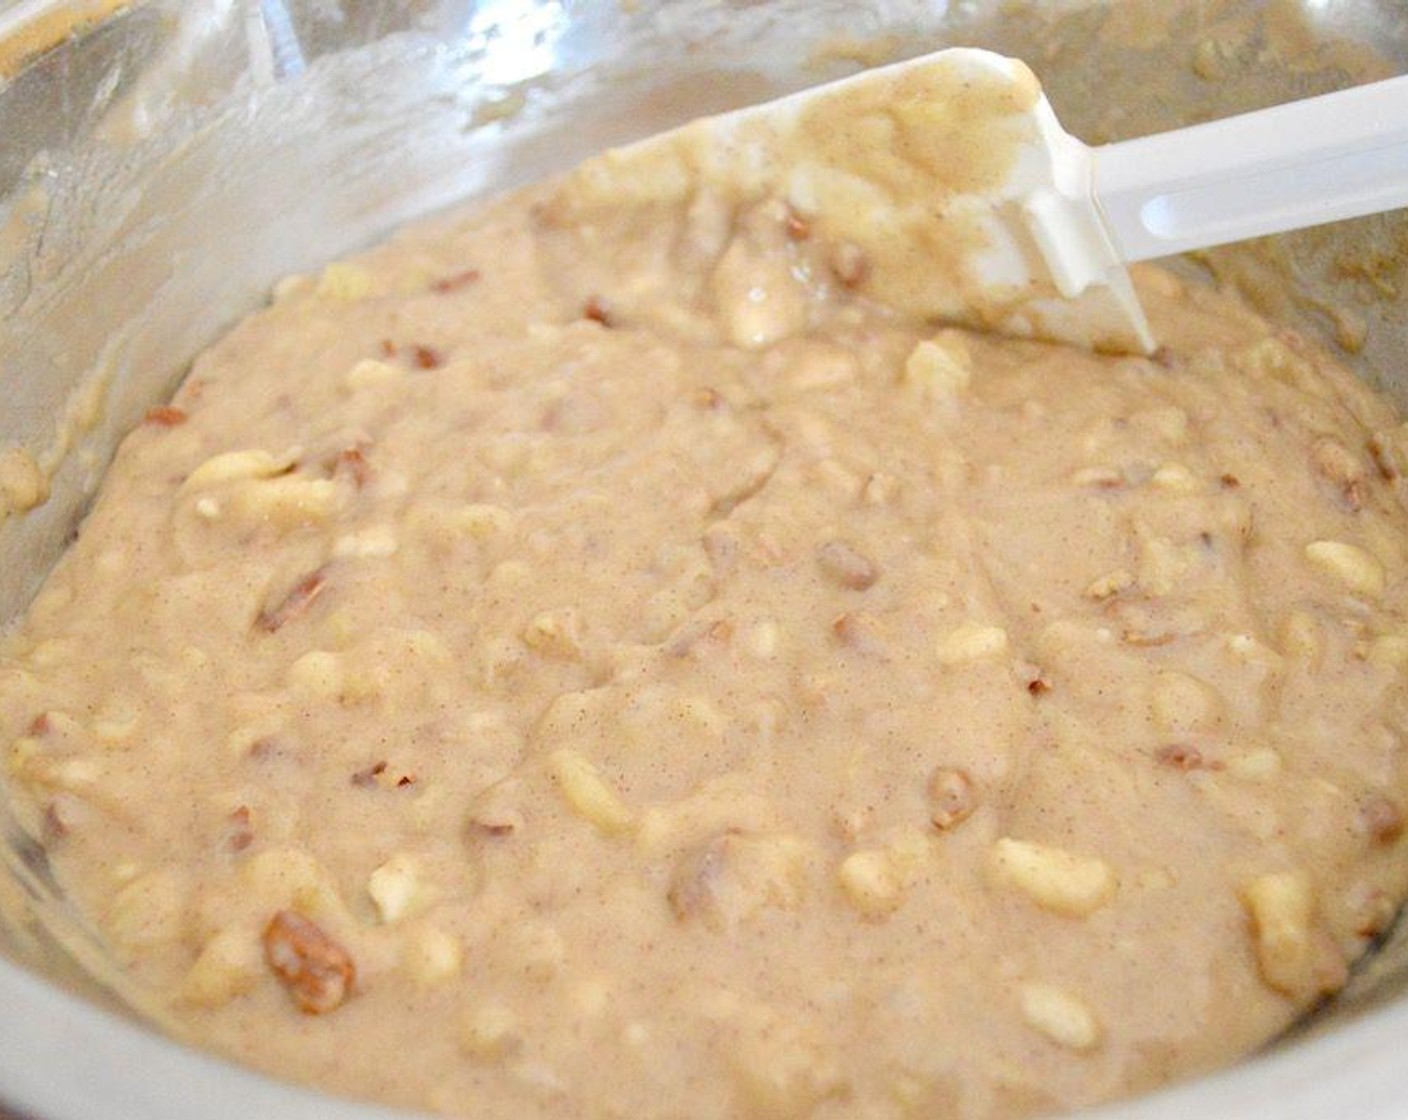 step 4 Stir the Bananas (4), Crushed Pineapple in 100% Pineapple Juice (1 cup), Vegetable Oil (1 cup), Eggs (2), Vanilla Extract (1/2 Tbsp), and Chopped Pecans (1 cup) together in another bowl thoroughly, then pour it into the bowl of dry ingredients.